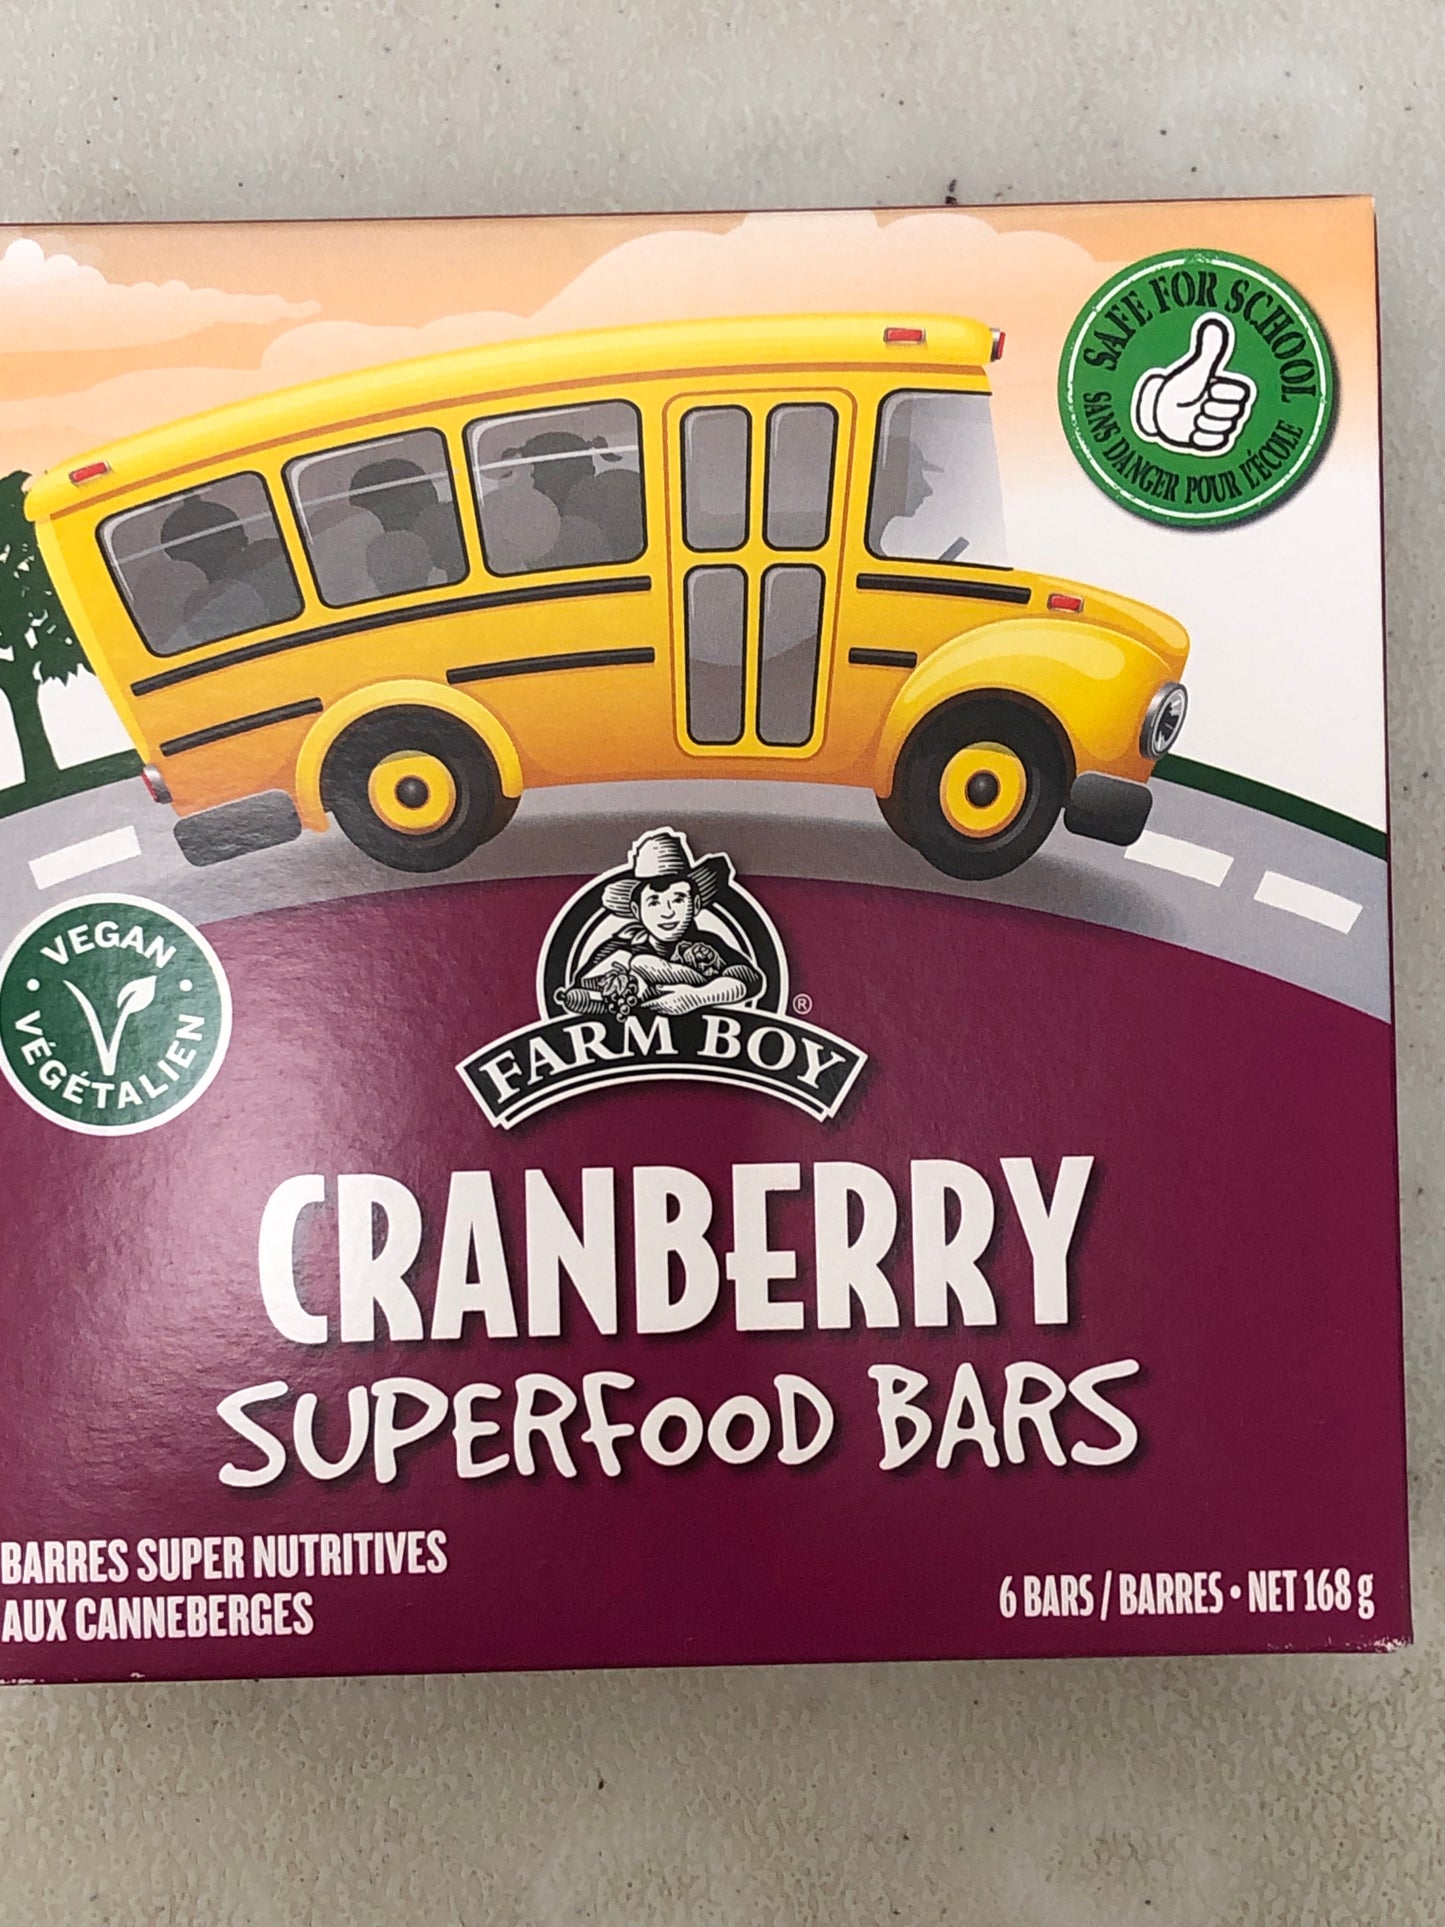 Cranberry superfood bars